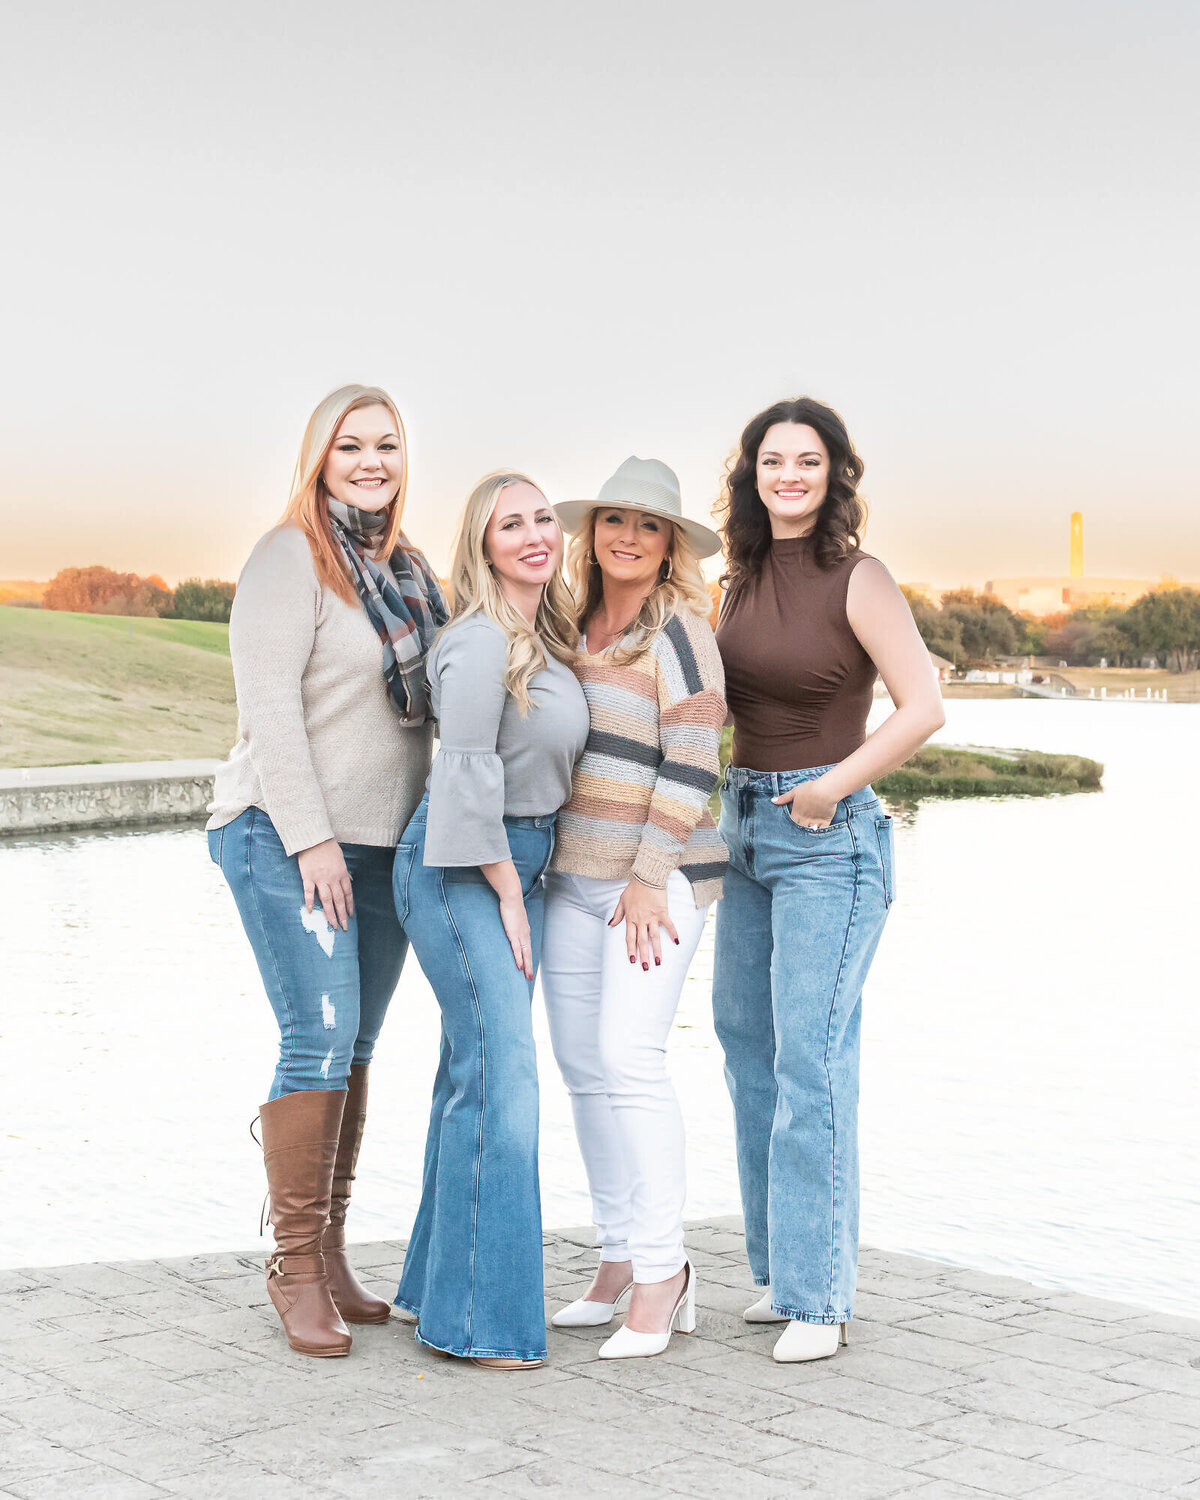 The four founders of McKinney Babes in Business in Adriatica McKinney